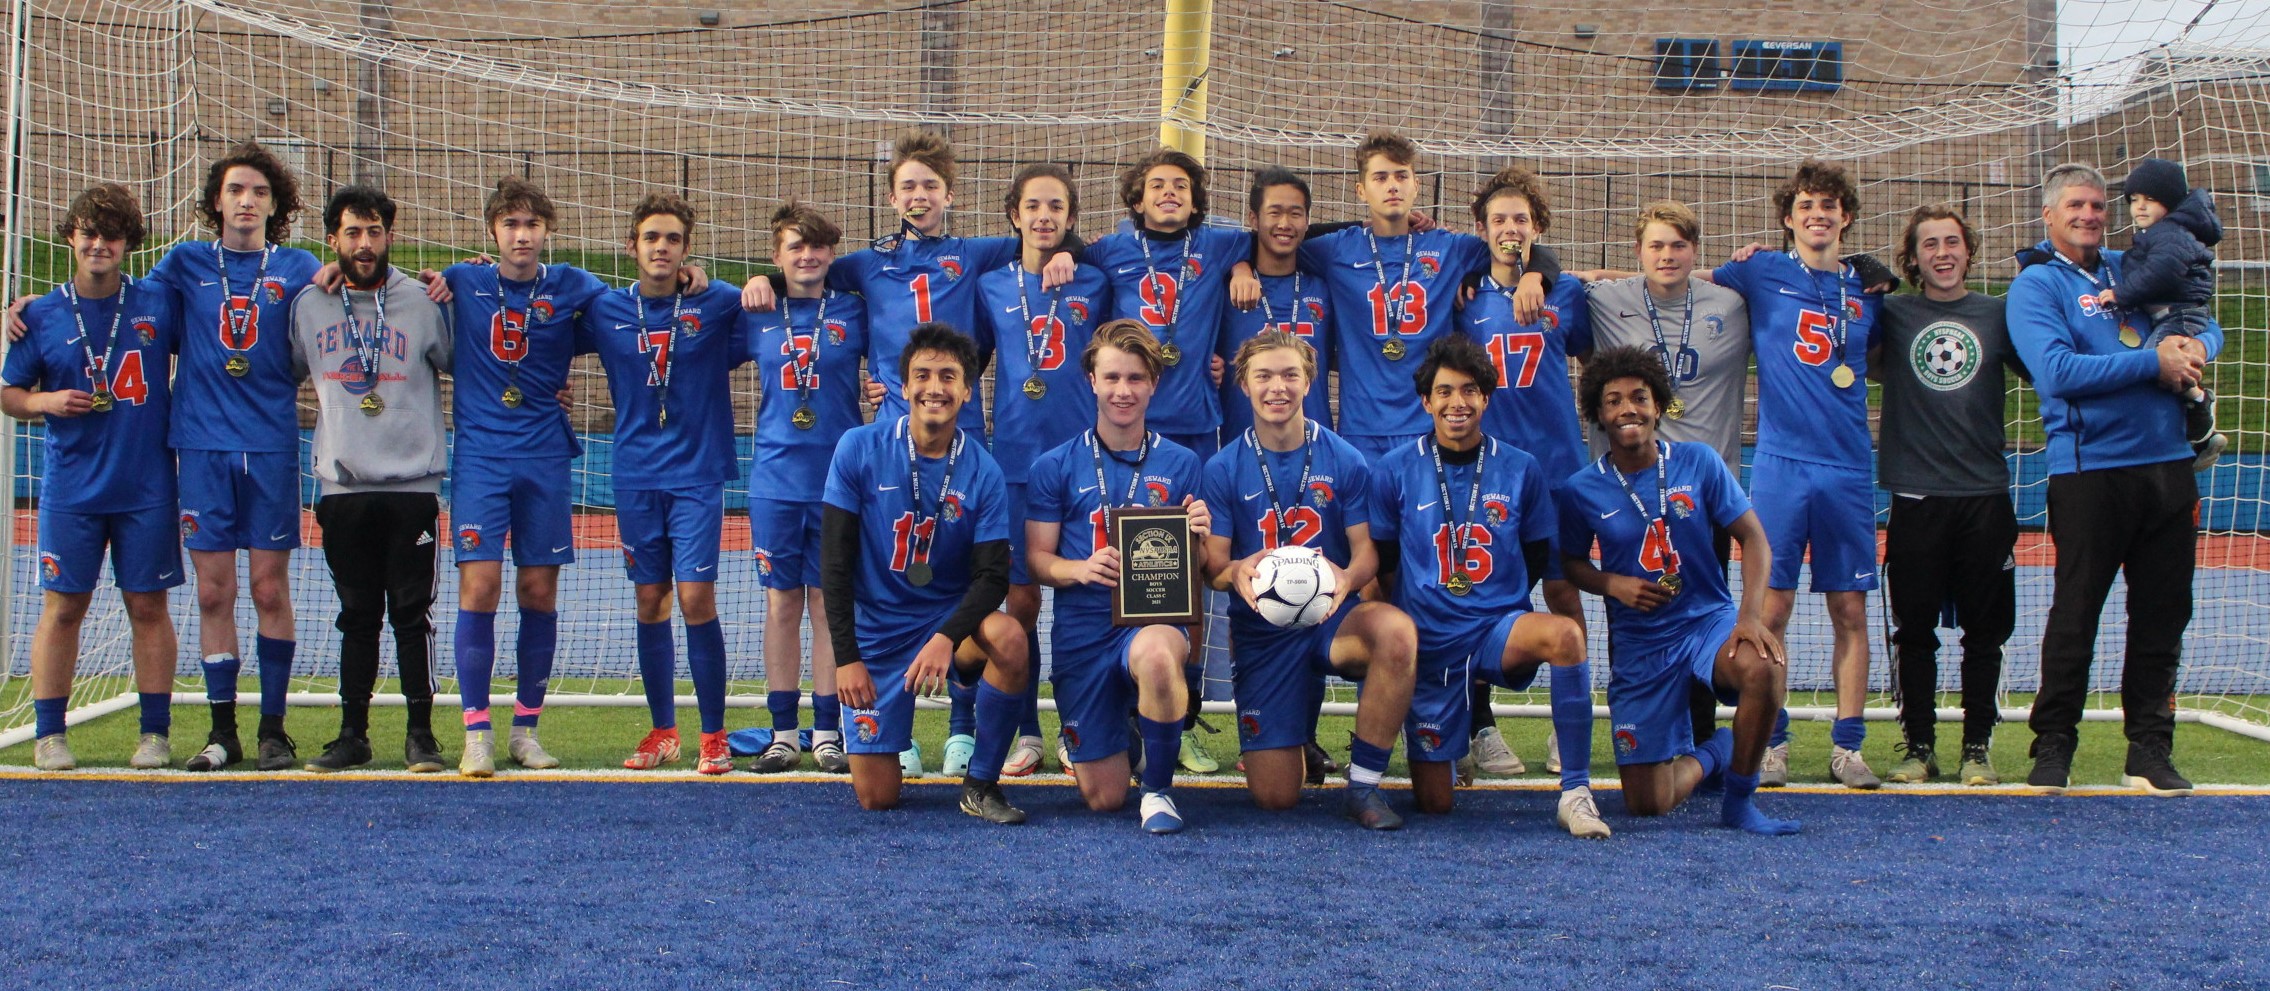 A group of high school soccer players full team wearing blue soccer uniformsholding a plaque